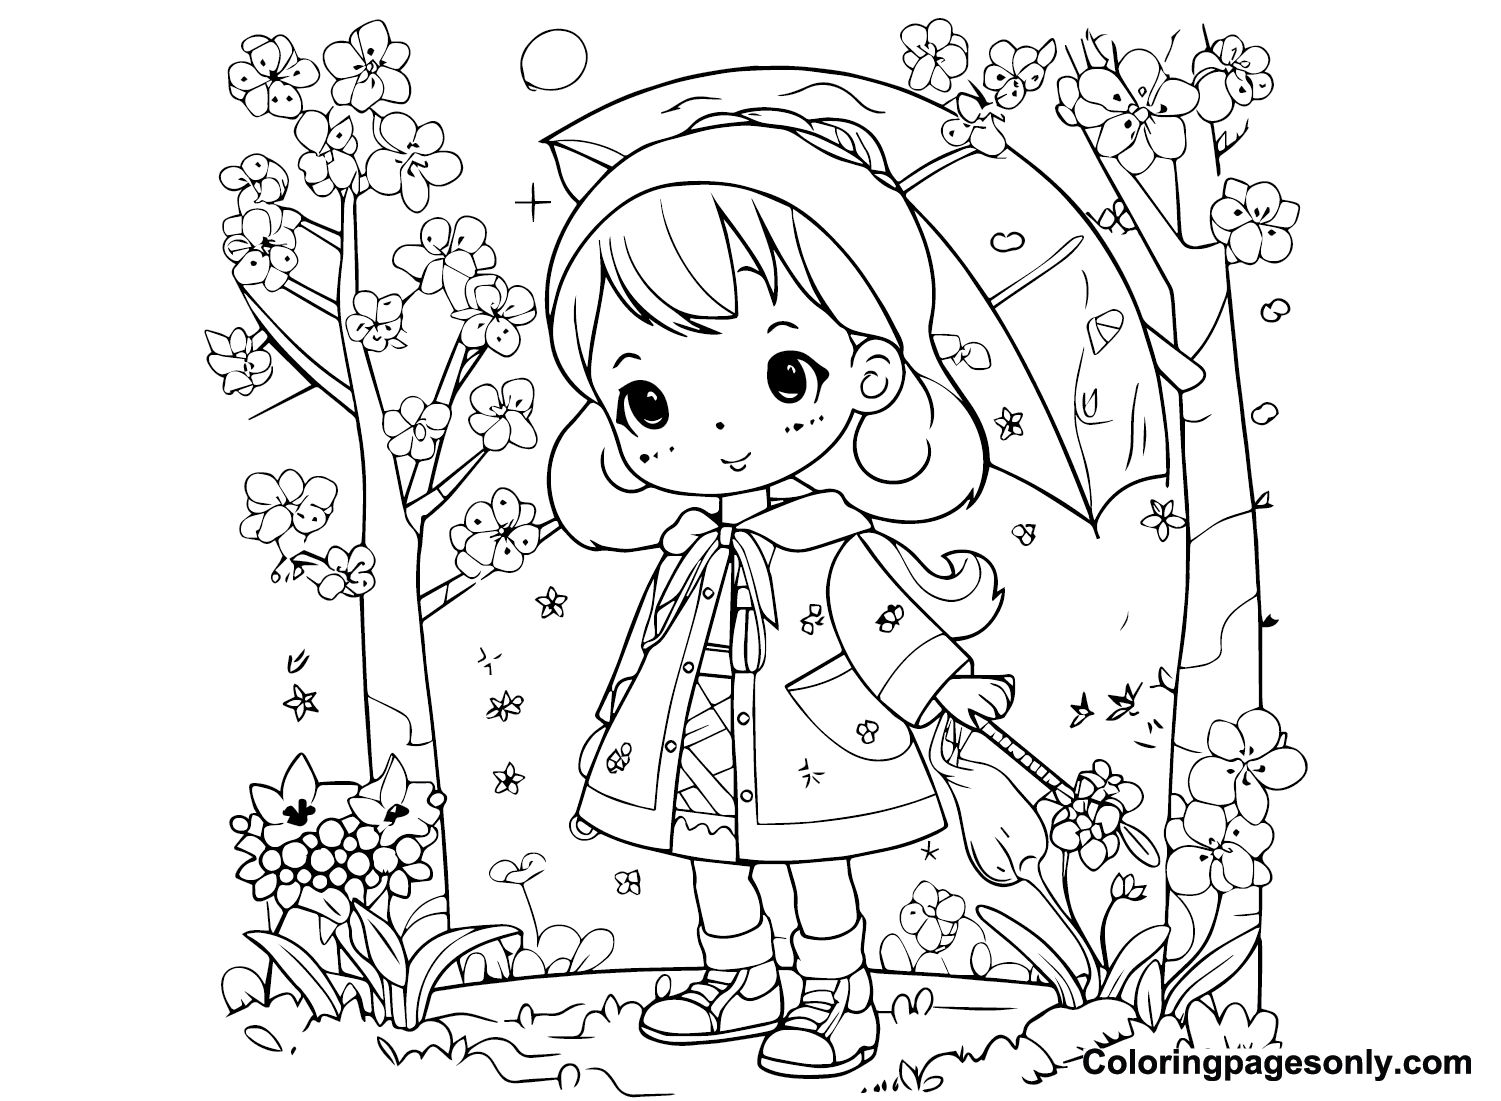 Cherry Blossom Girl Coloring Page